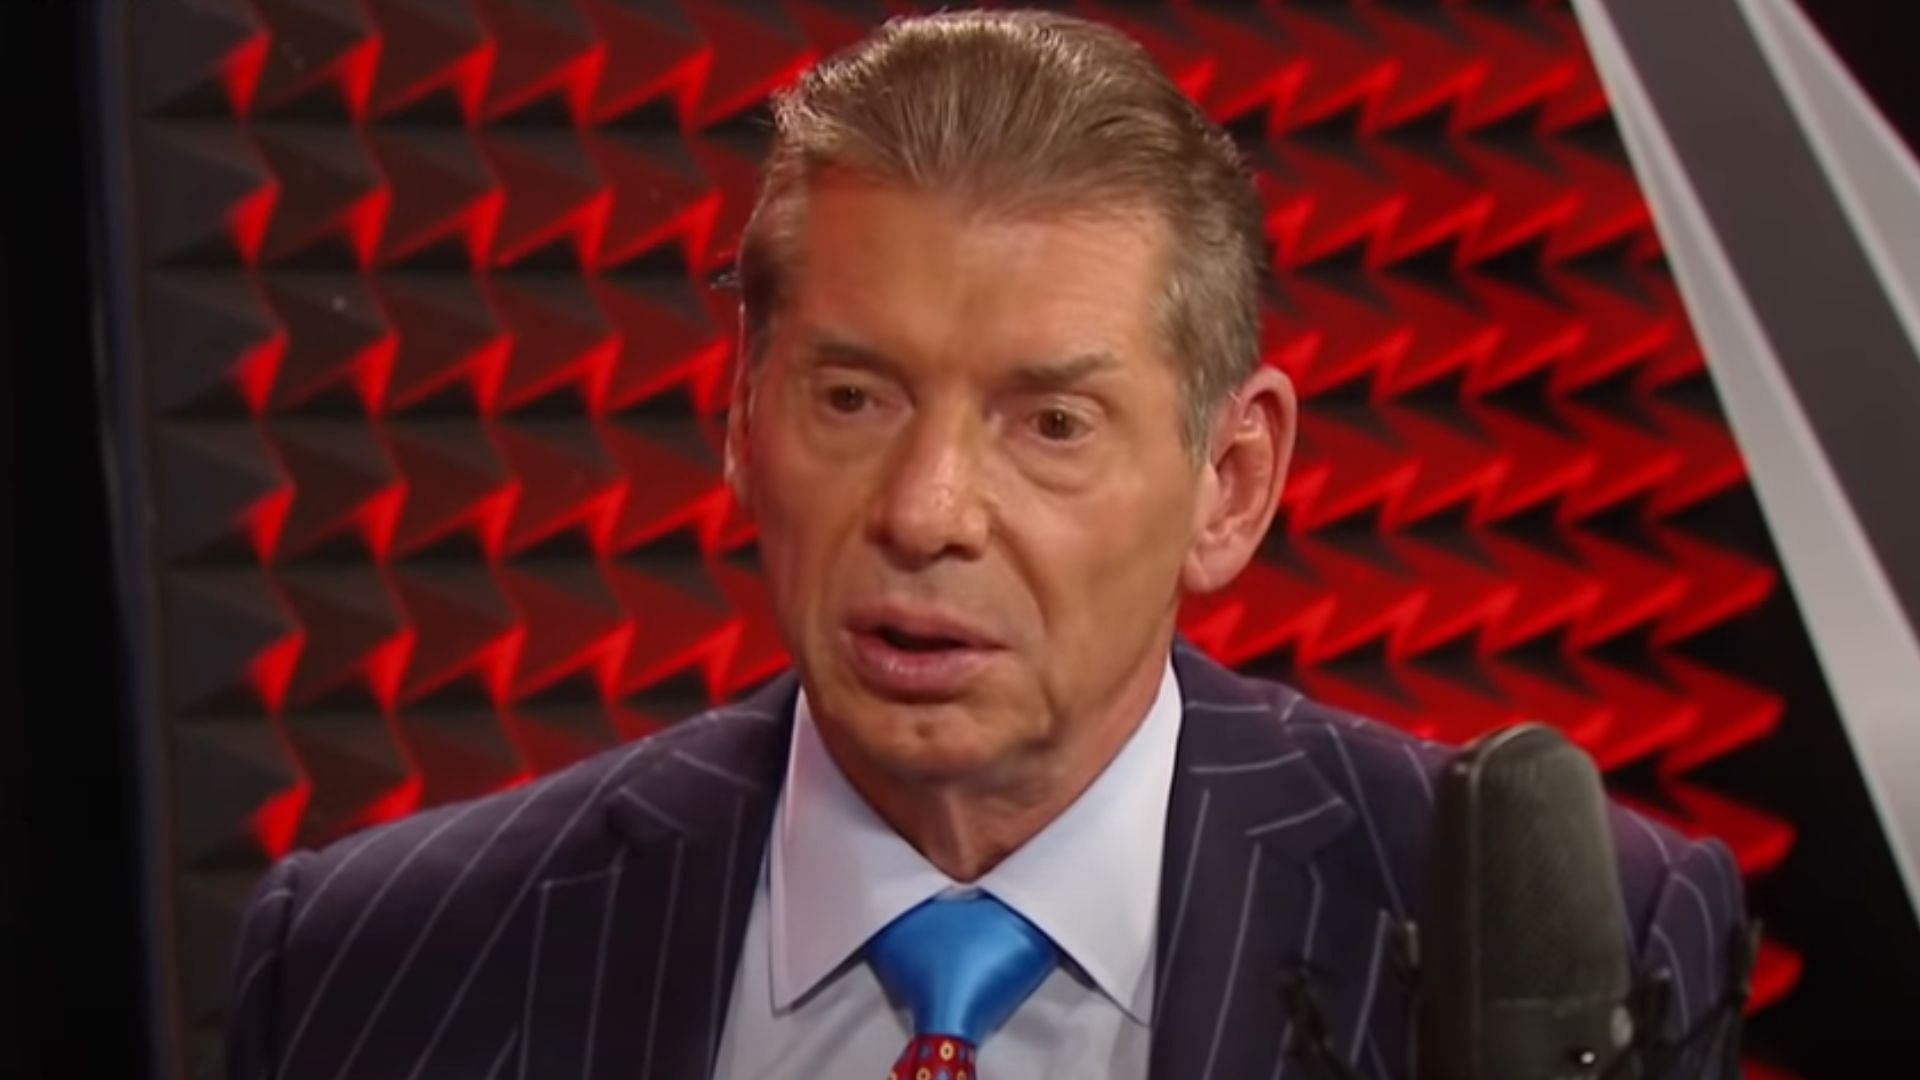 Vince McMahon spearheaded WWE creative between 1982 and 2022